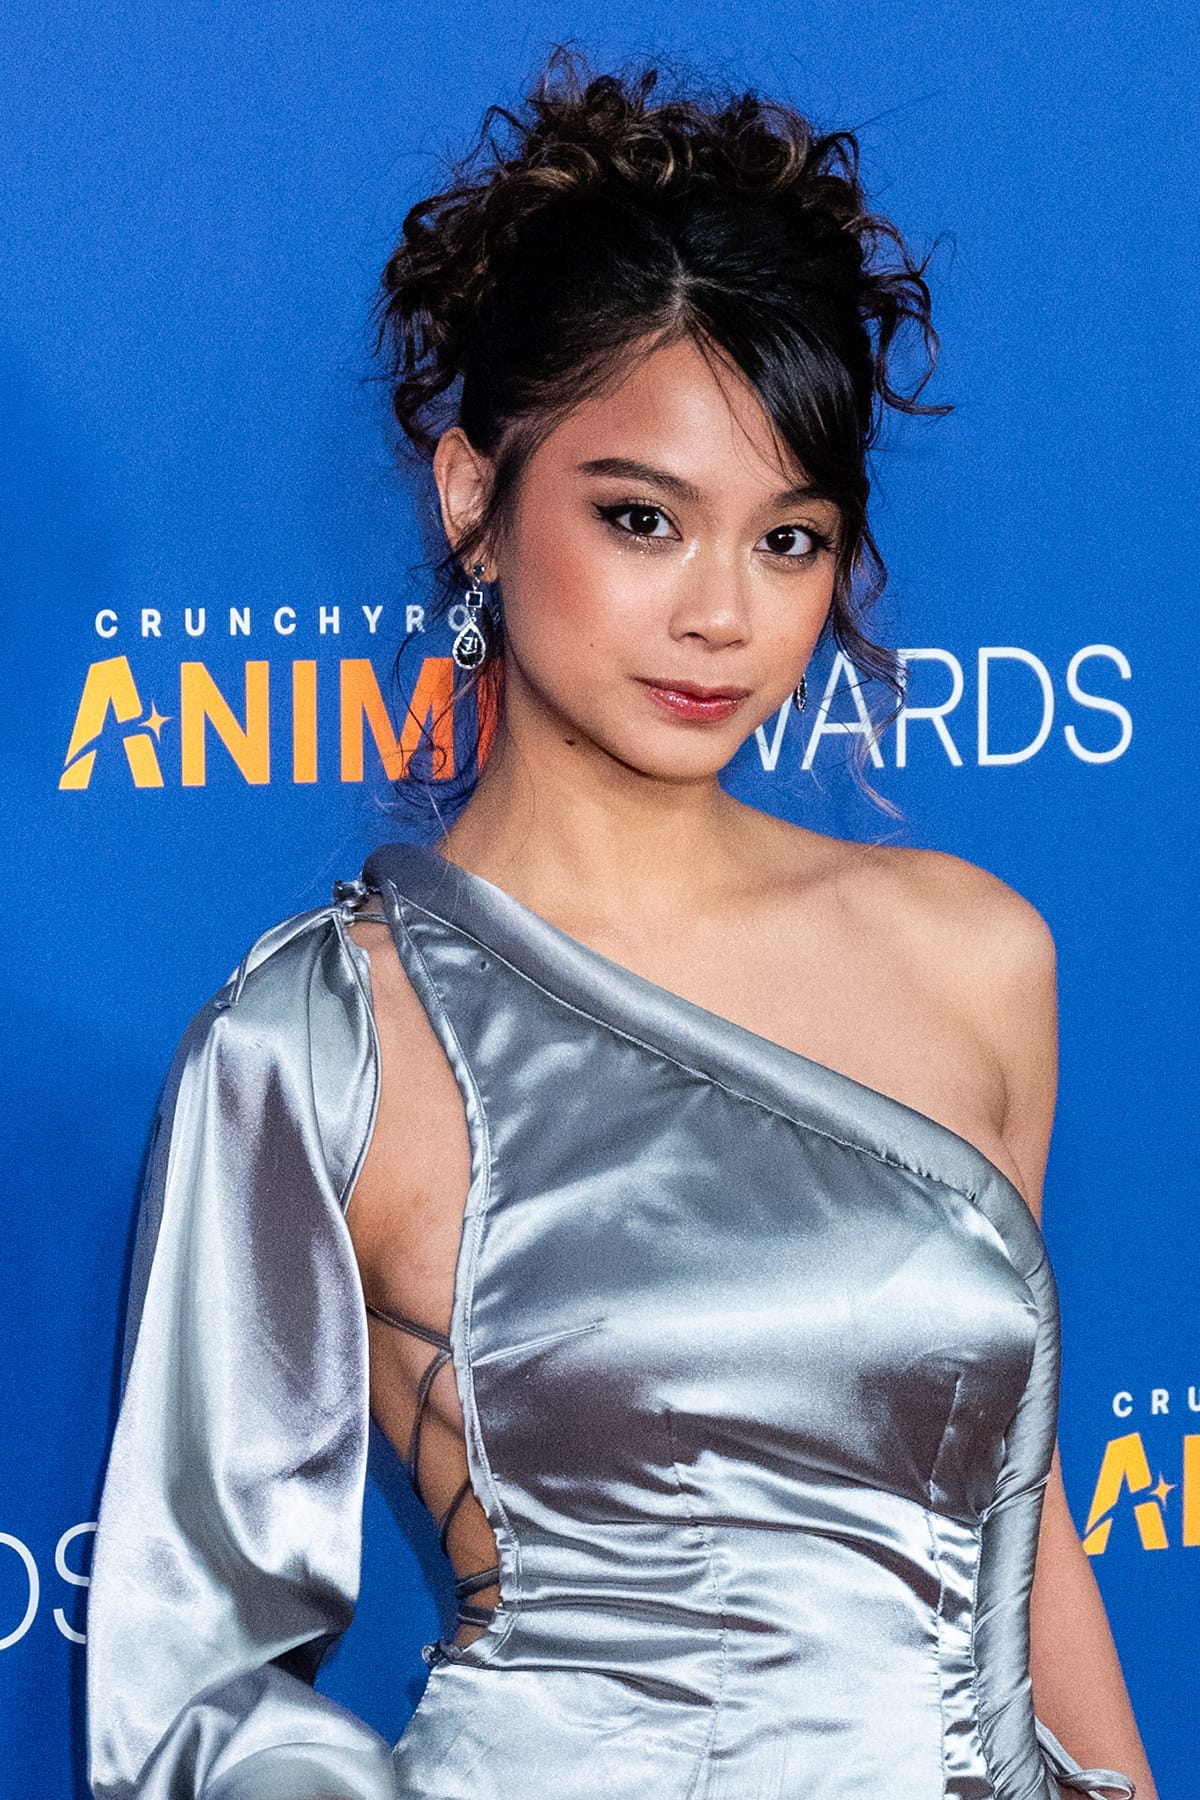 Ylona Garcia: From ‘Pinoy Big Brother’ House to Anime Awards